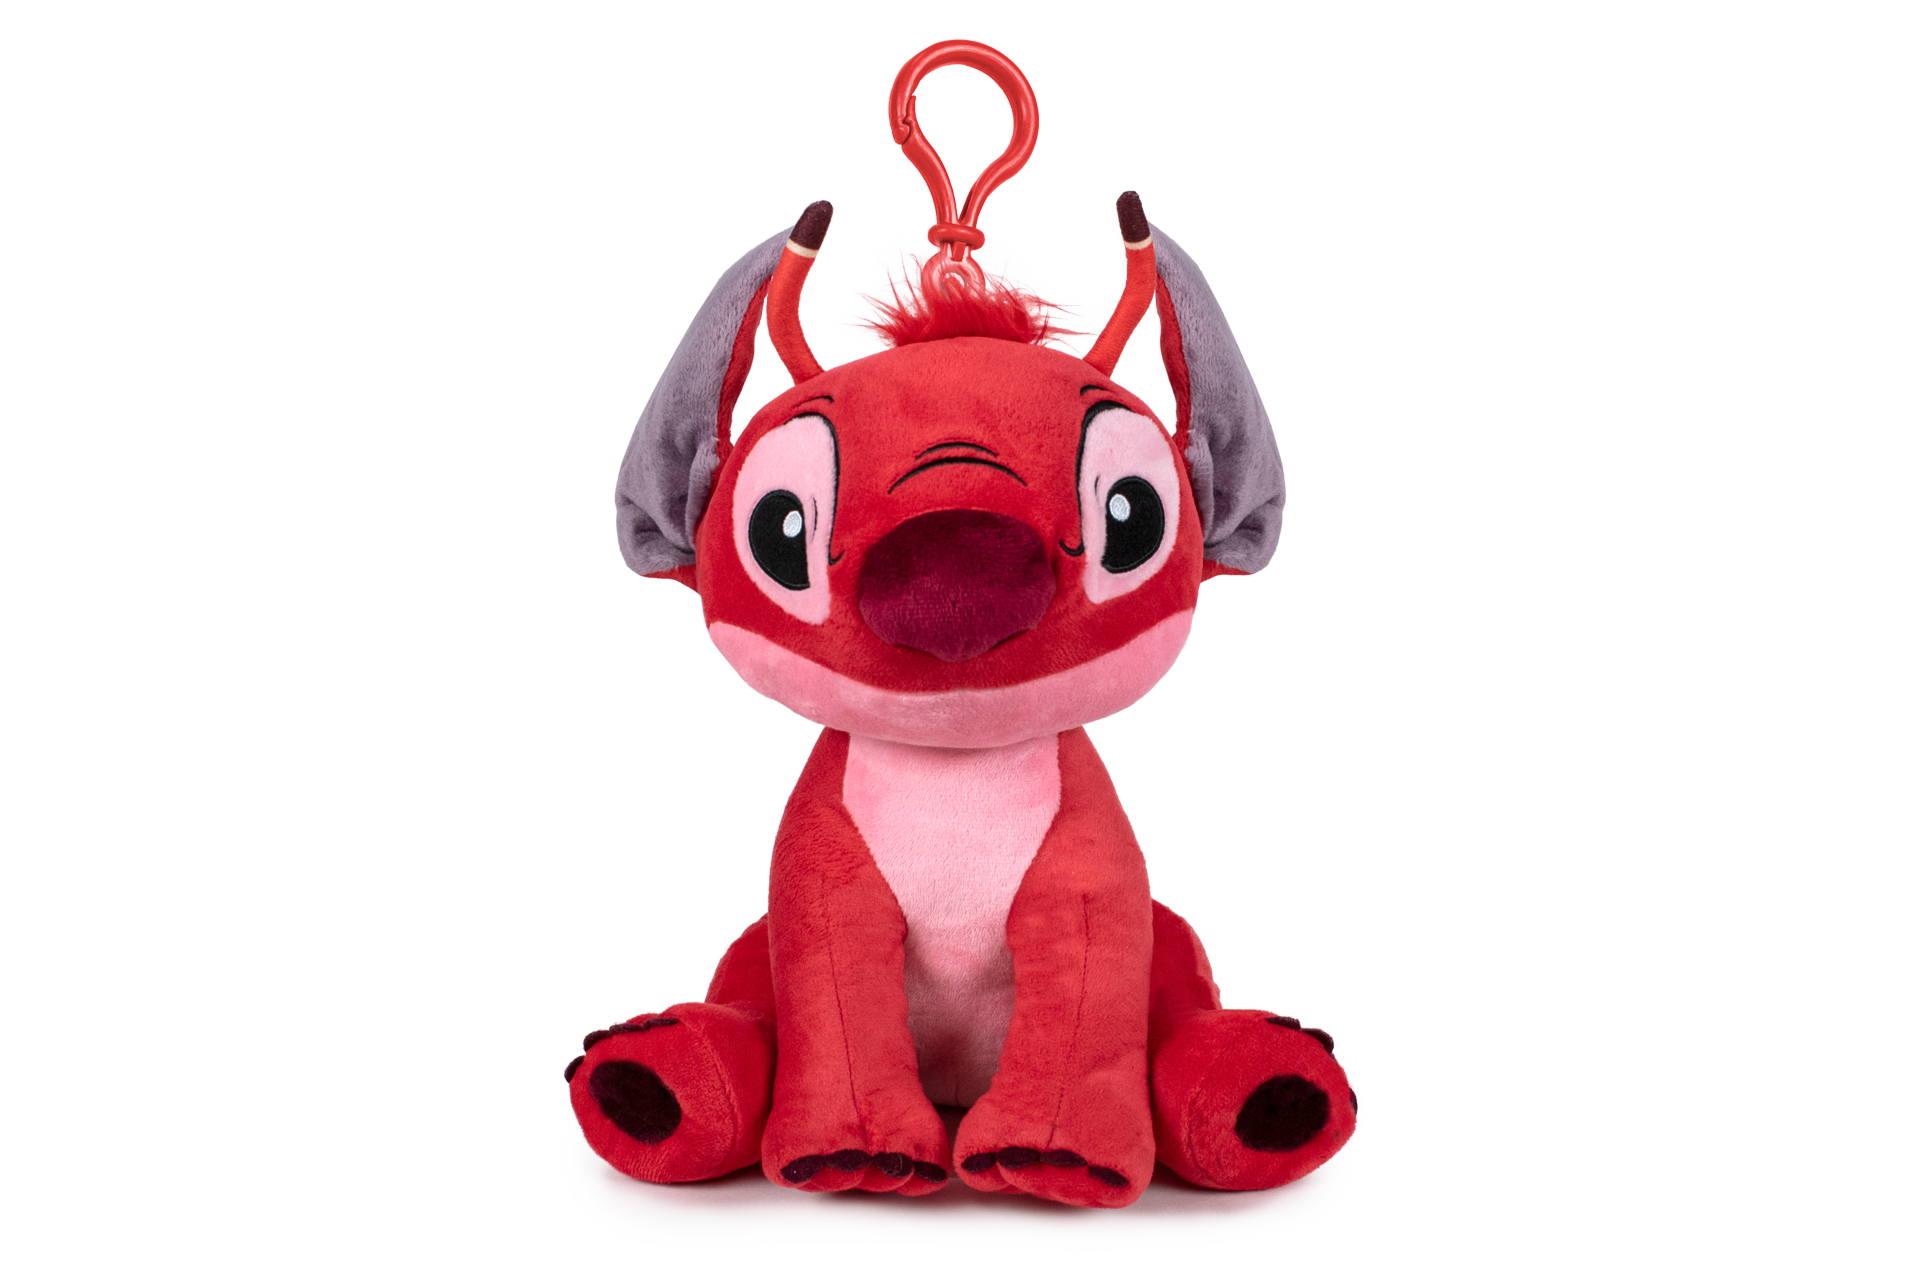 Disney Dancing & Grooving Stitch Plush with Sounds, Disney Lilo & Stitch,  Officially Licensed Kids Toys for Ages 3 Up by Just Play